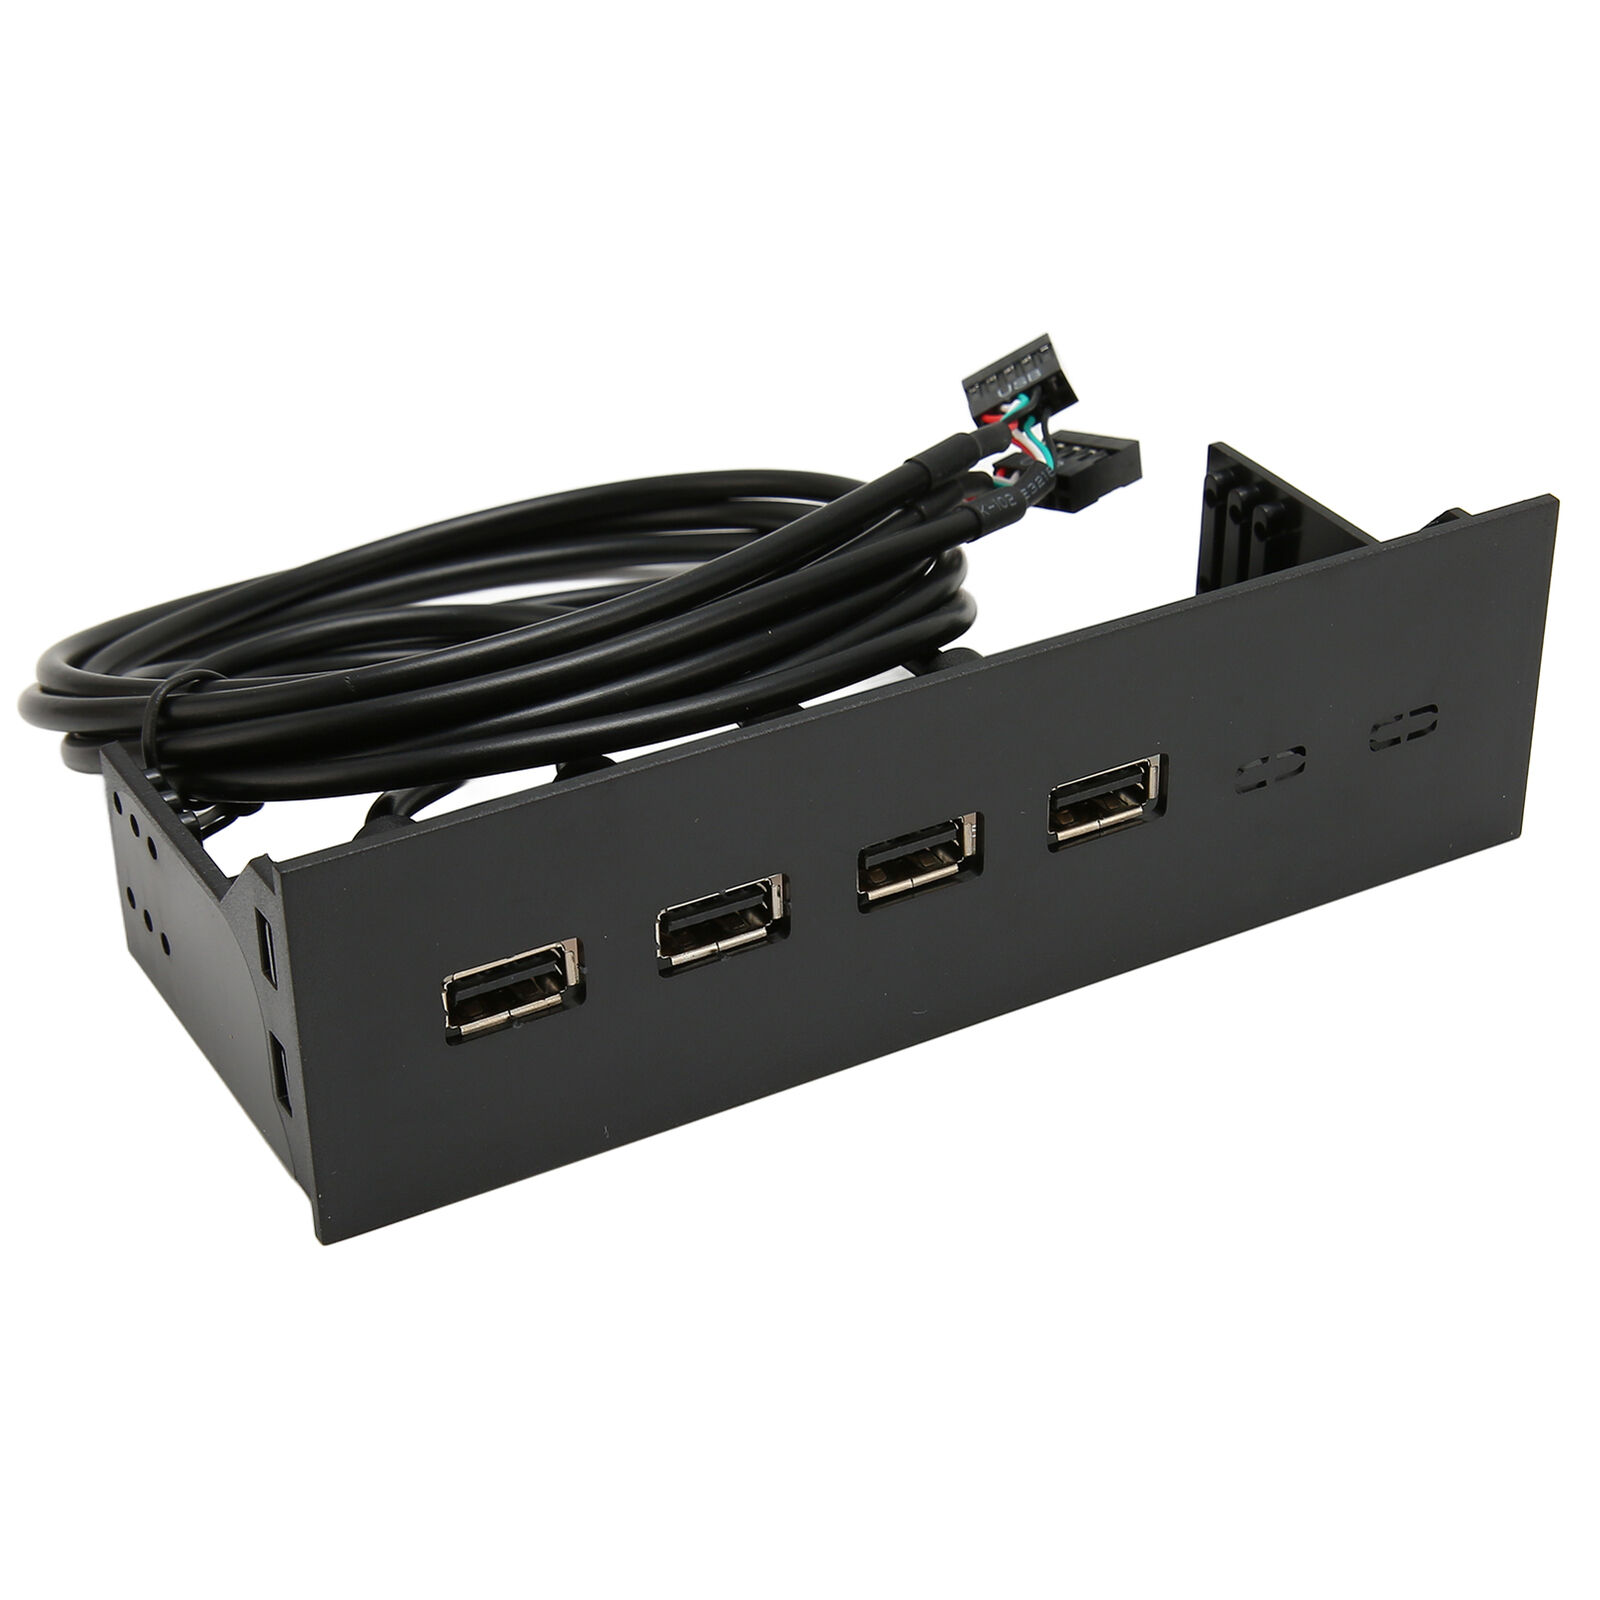 5.25 Inch USB2.0 Hub Front Panel 4 Ports 19pin Optical Drive Front Panel Fo NGF